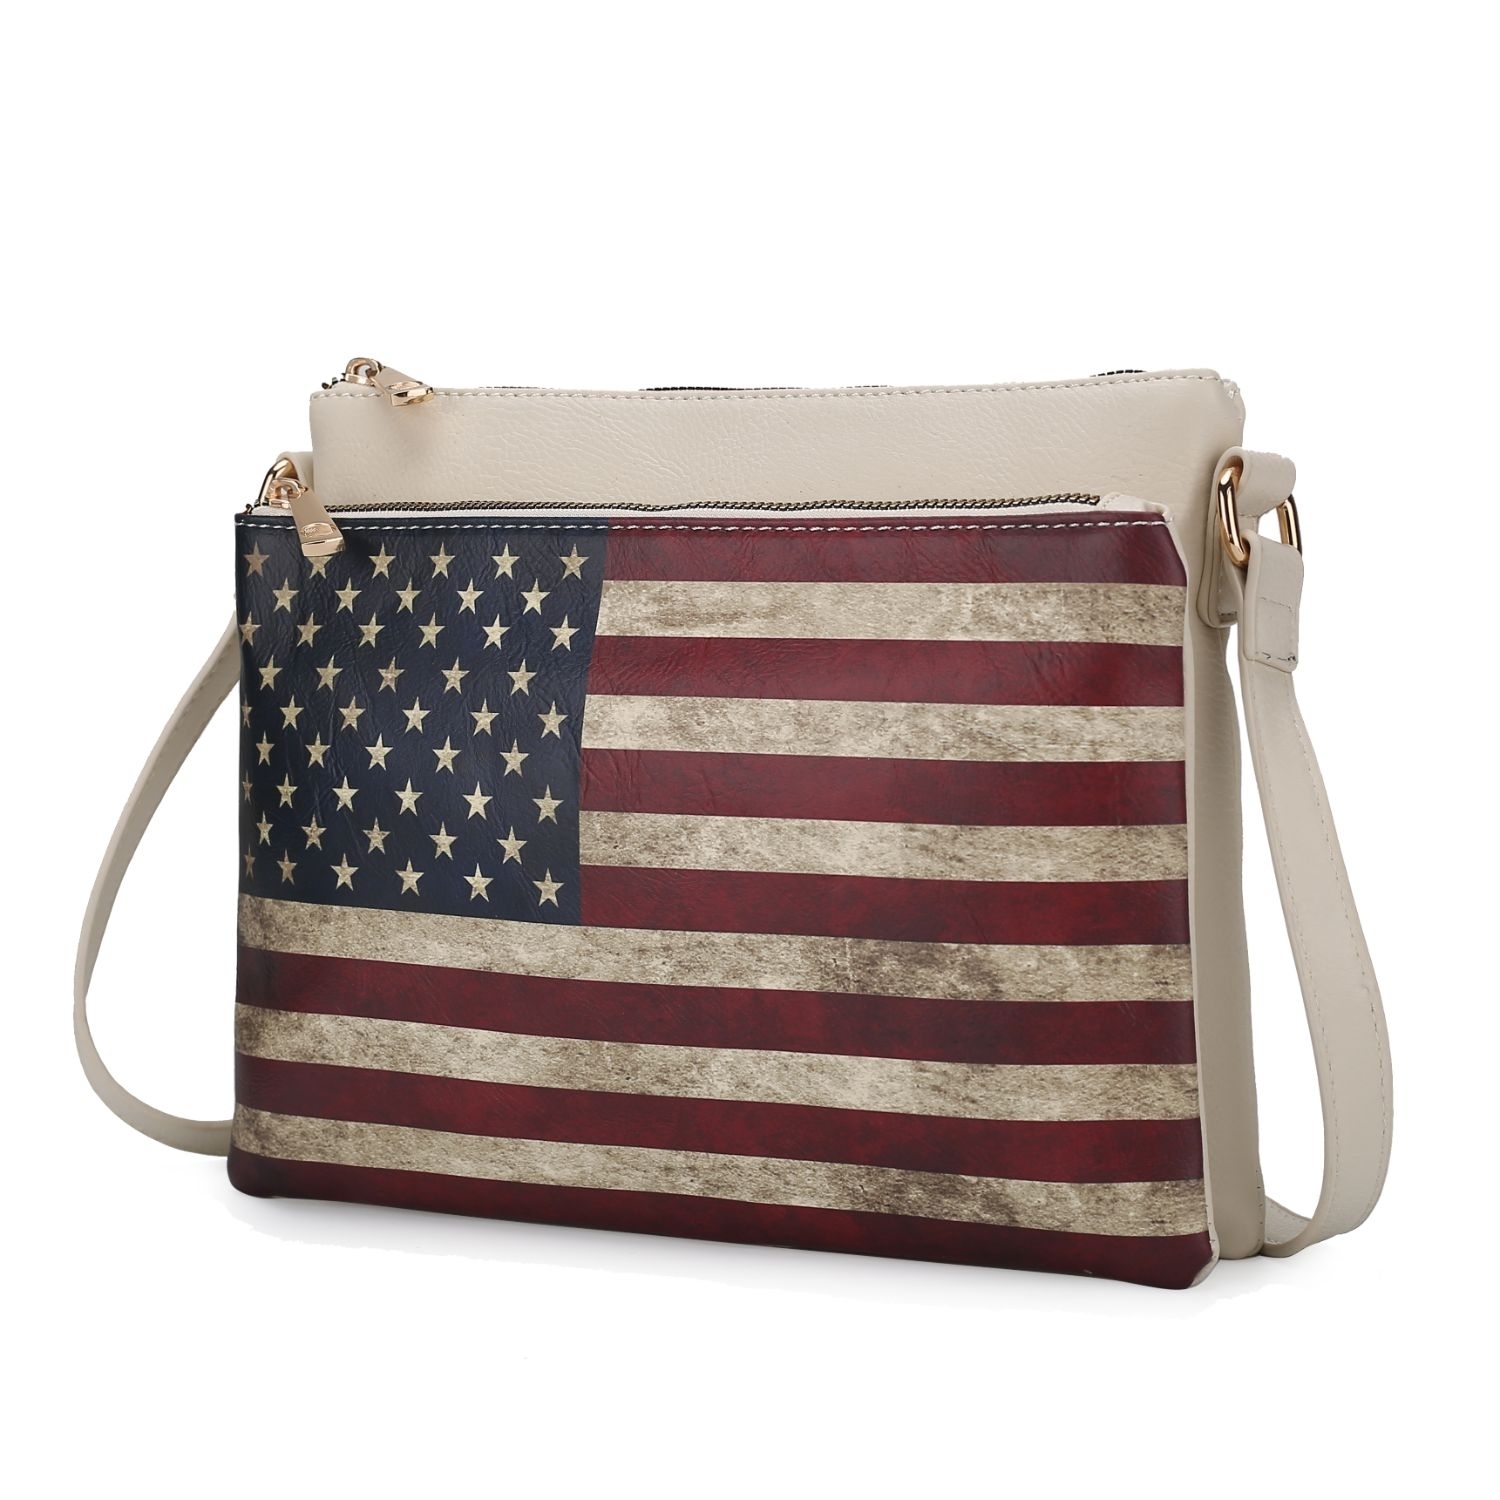 MKF Collection Madeline Printed Flag Vegan Leather Women's Crossbody Bag By Mia K - Taupe